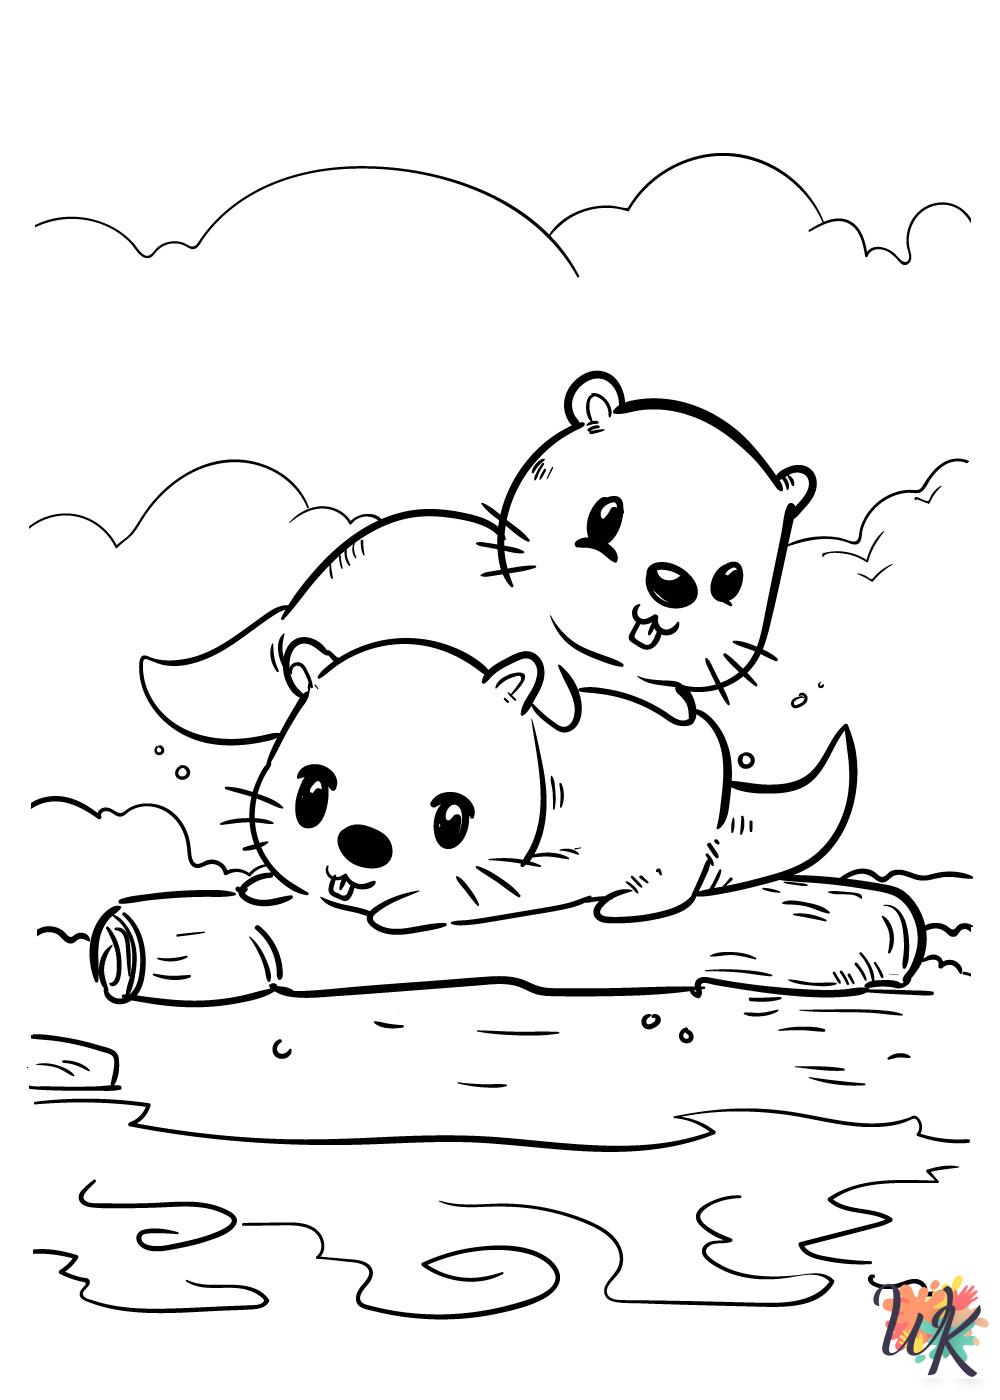 Cute Animals ornaments coloring pages